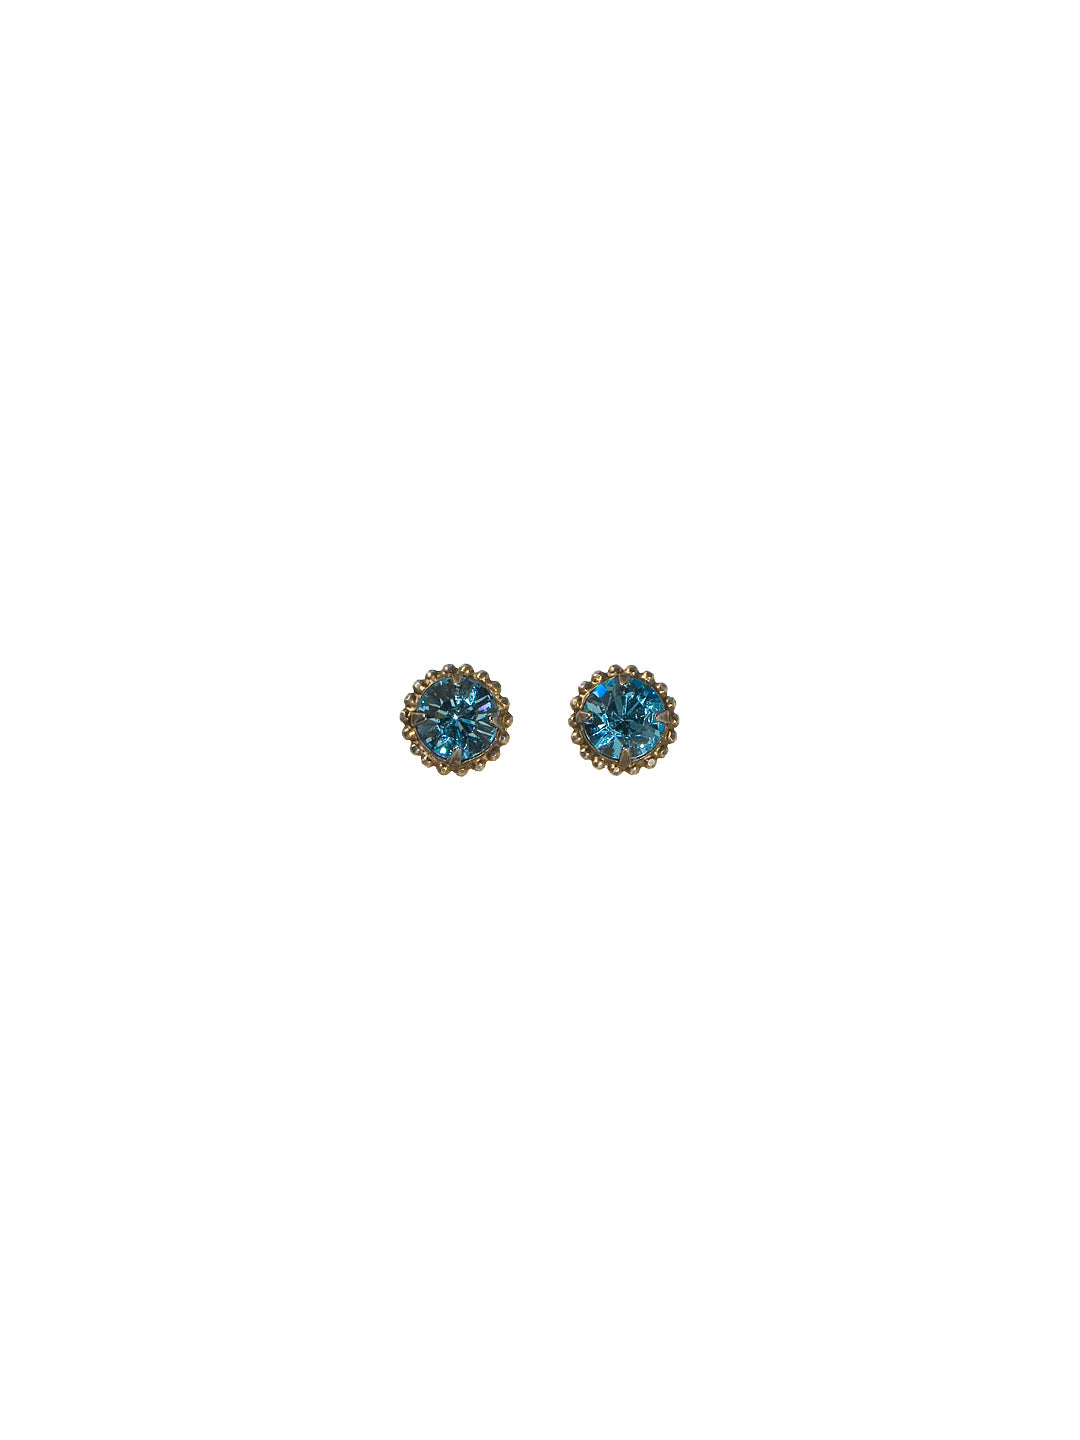 Simplicity Stud Earrings - EBY38ASOC - <p>A timeless classic, the Simplicity Stud Earrings feature round cut crystals in a variety of colors; accented with a halo of metal beaded detail. Need help picking a stud? <a href="https://www.sorrelli.com/blogs/sisterhood/round-stud-earrings-101-a-rundown-of-sizes-styles-and-sparkle">Check out our size guide!</a> From Sorrelli's Ocean collection in our Antique Silver-tone finish.</p>